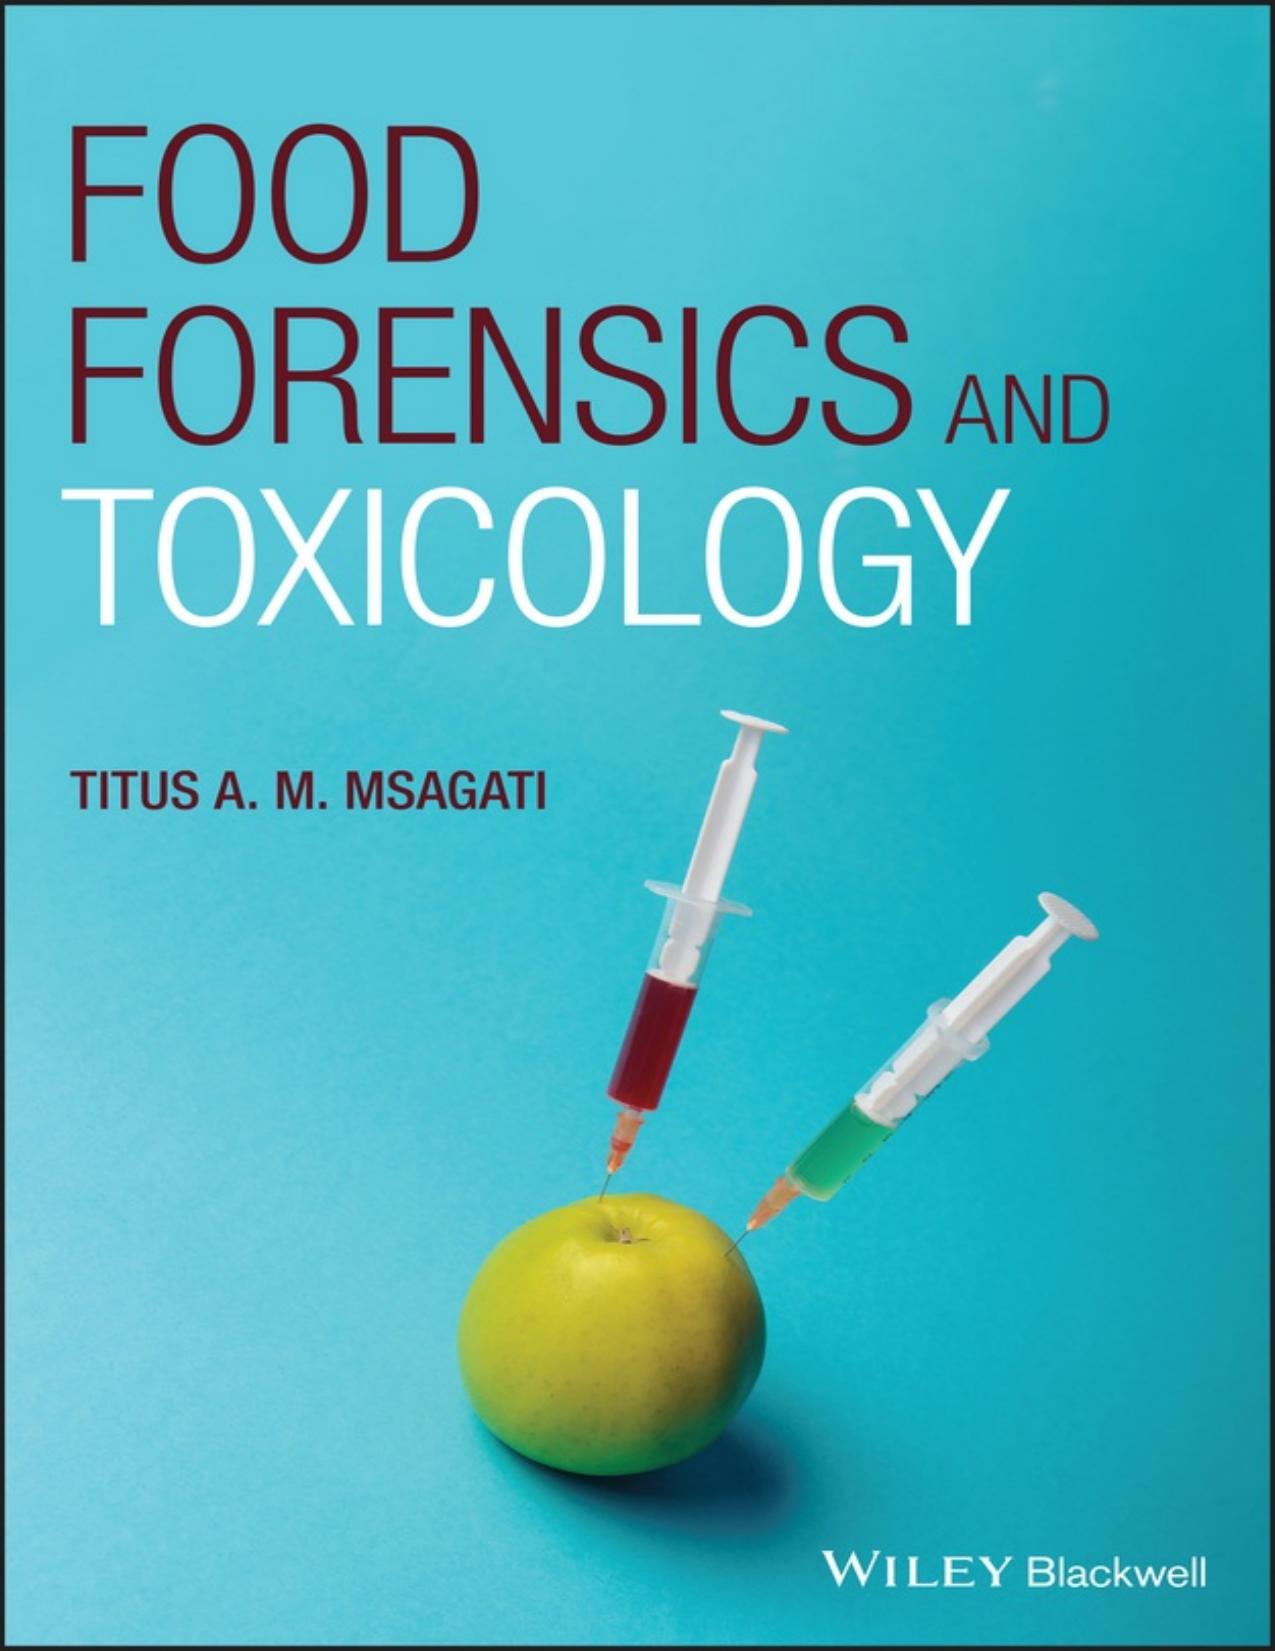 Food forensics and toxicology - PDFDrive.com